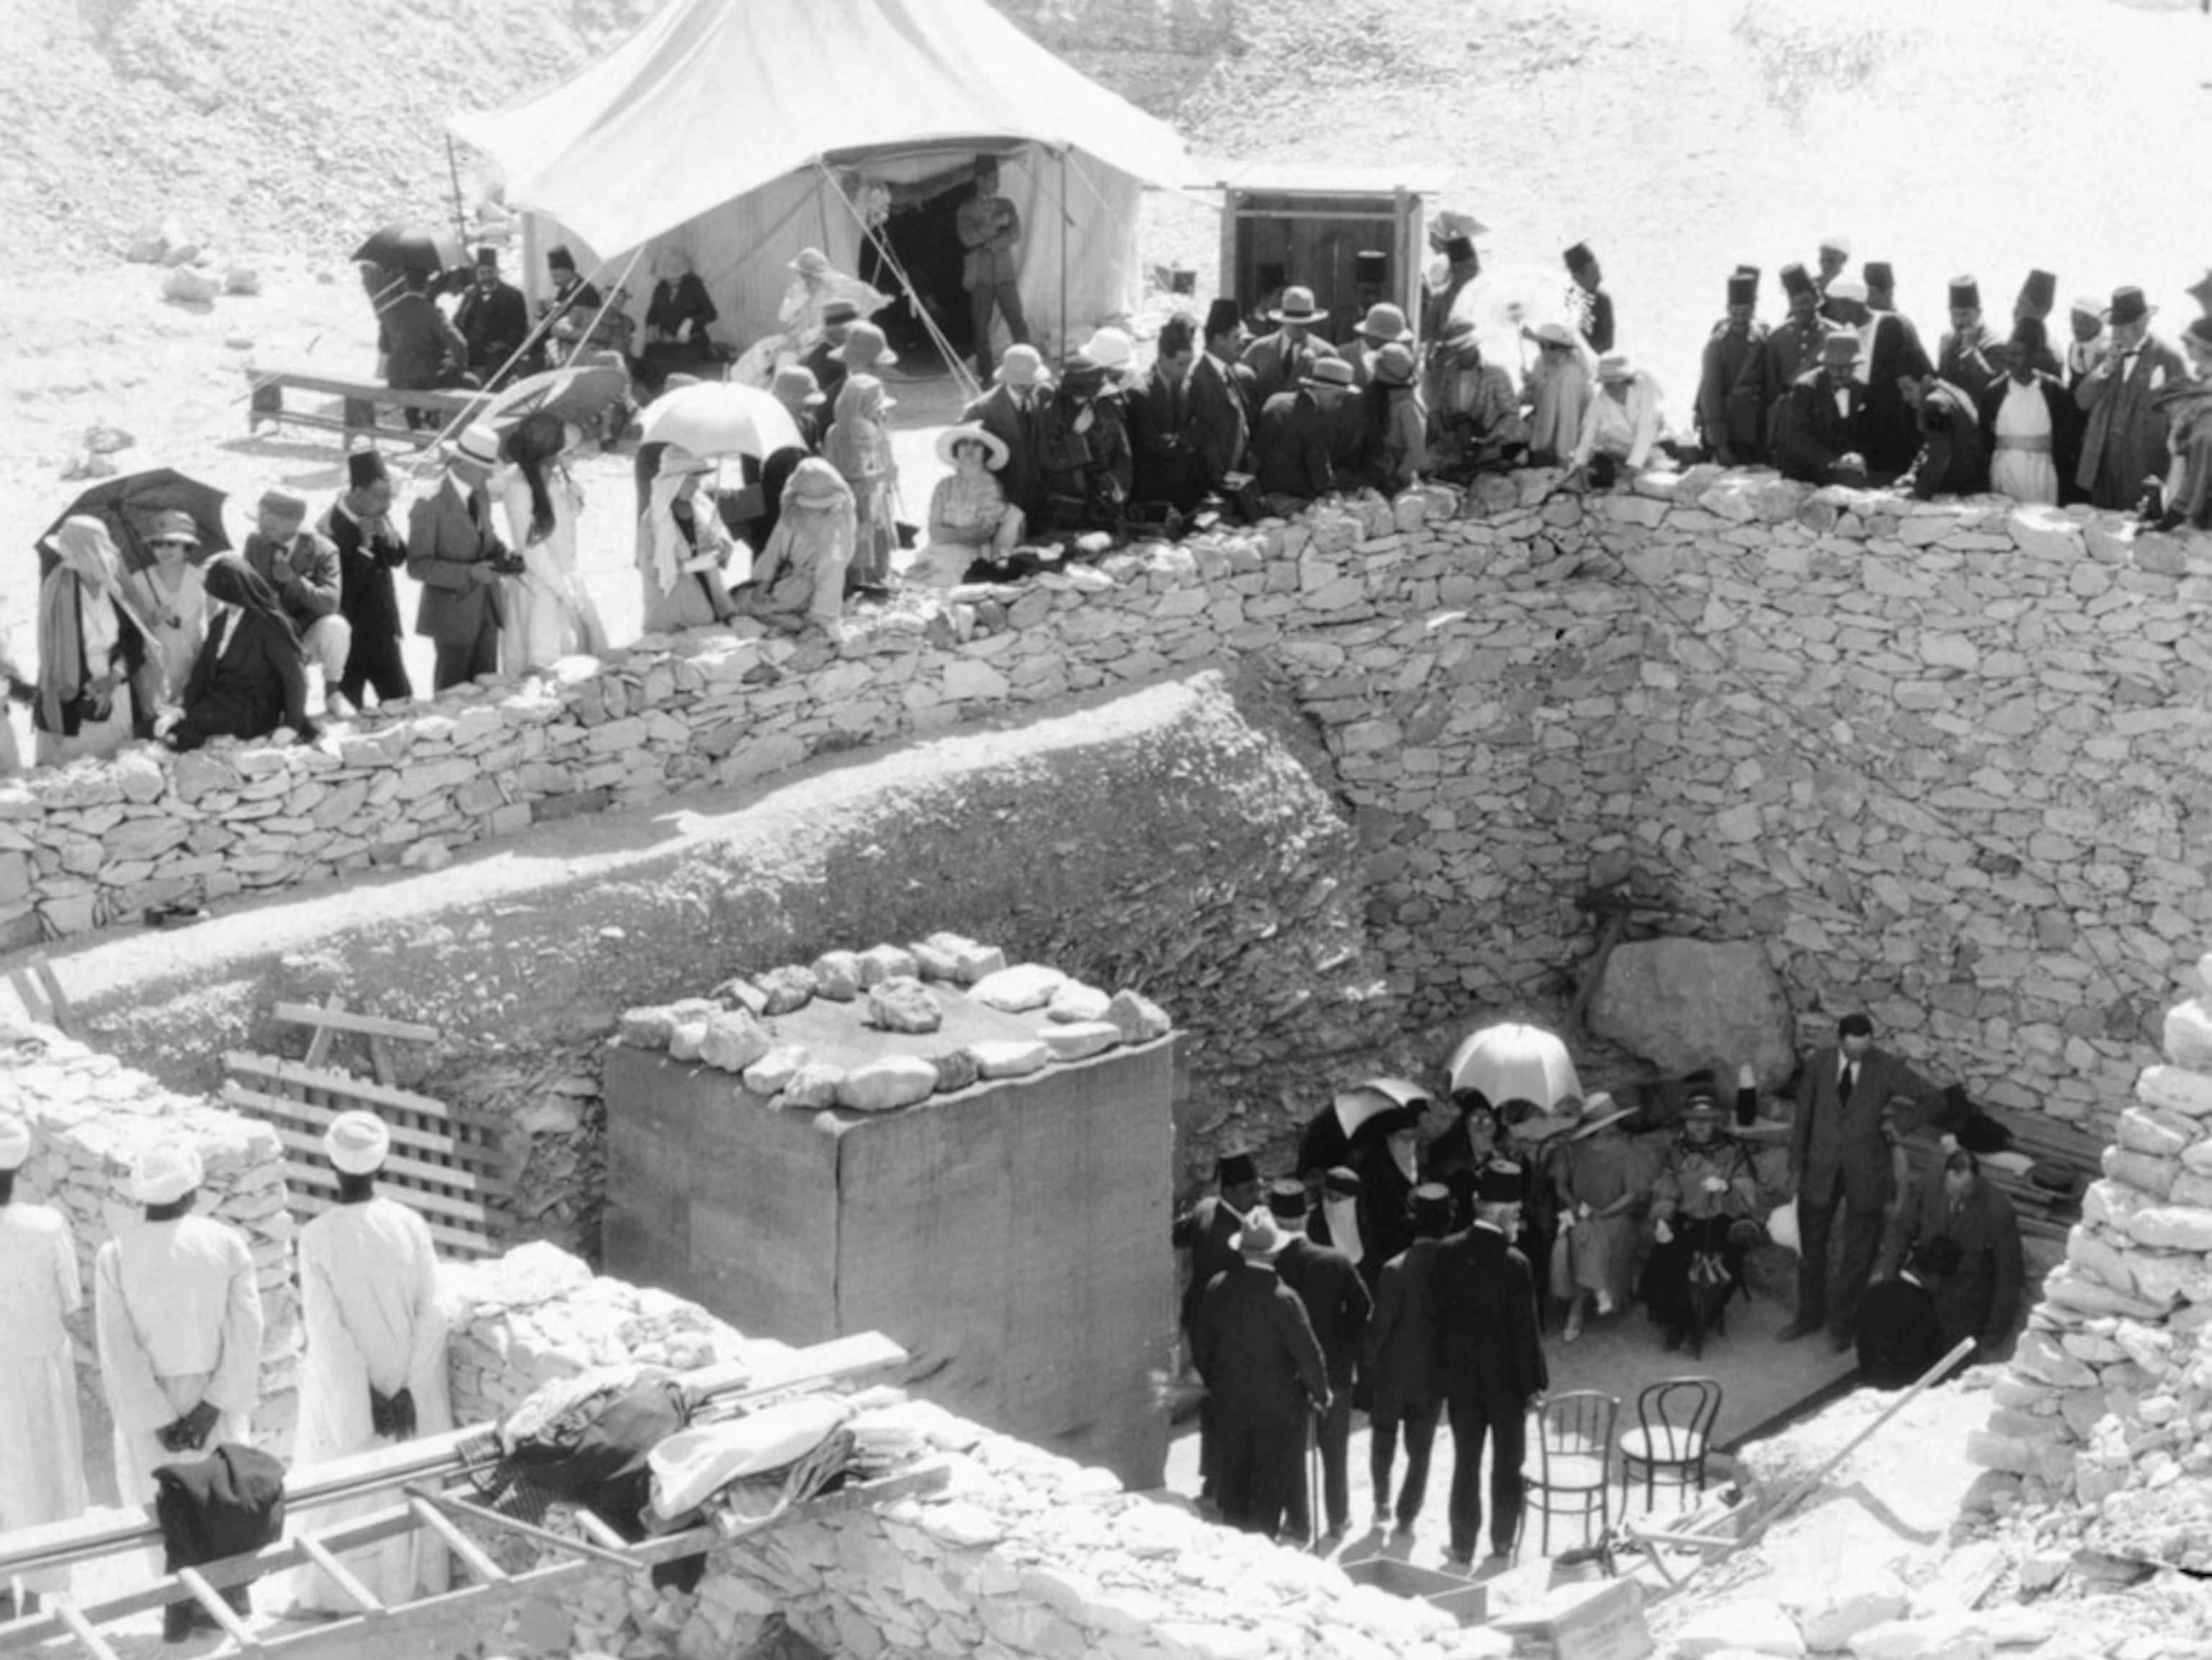 Tourist crowds outside the tomb entrance in February 1923